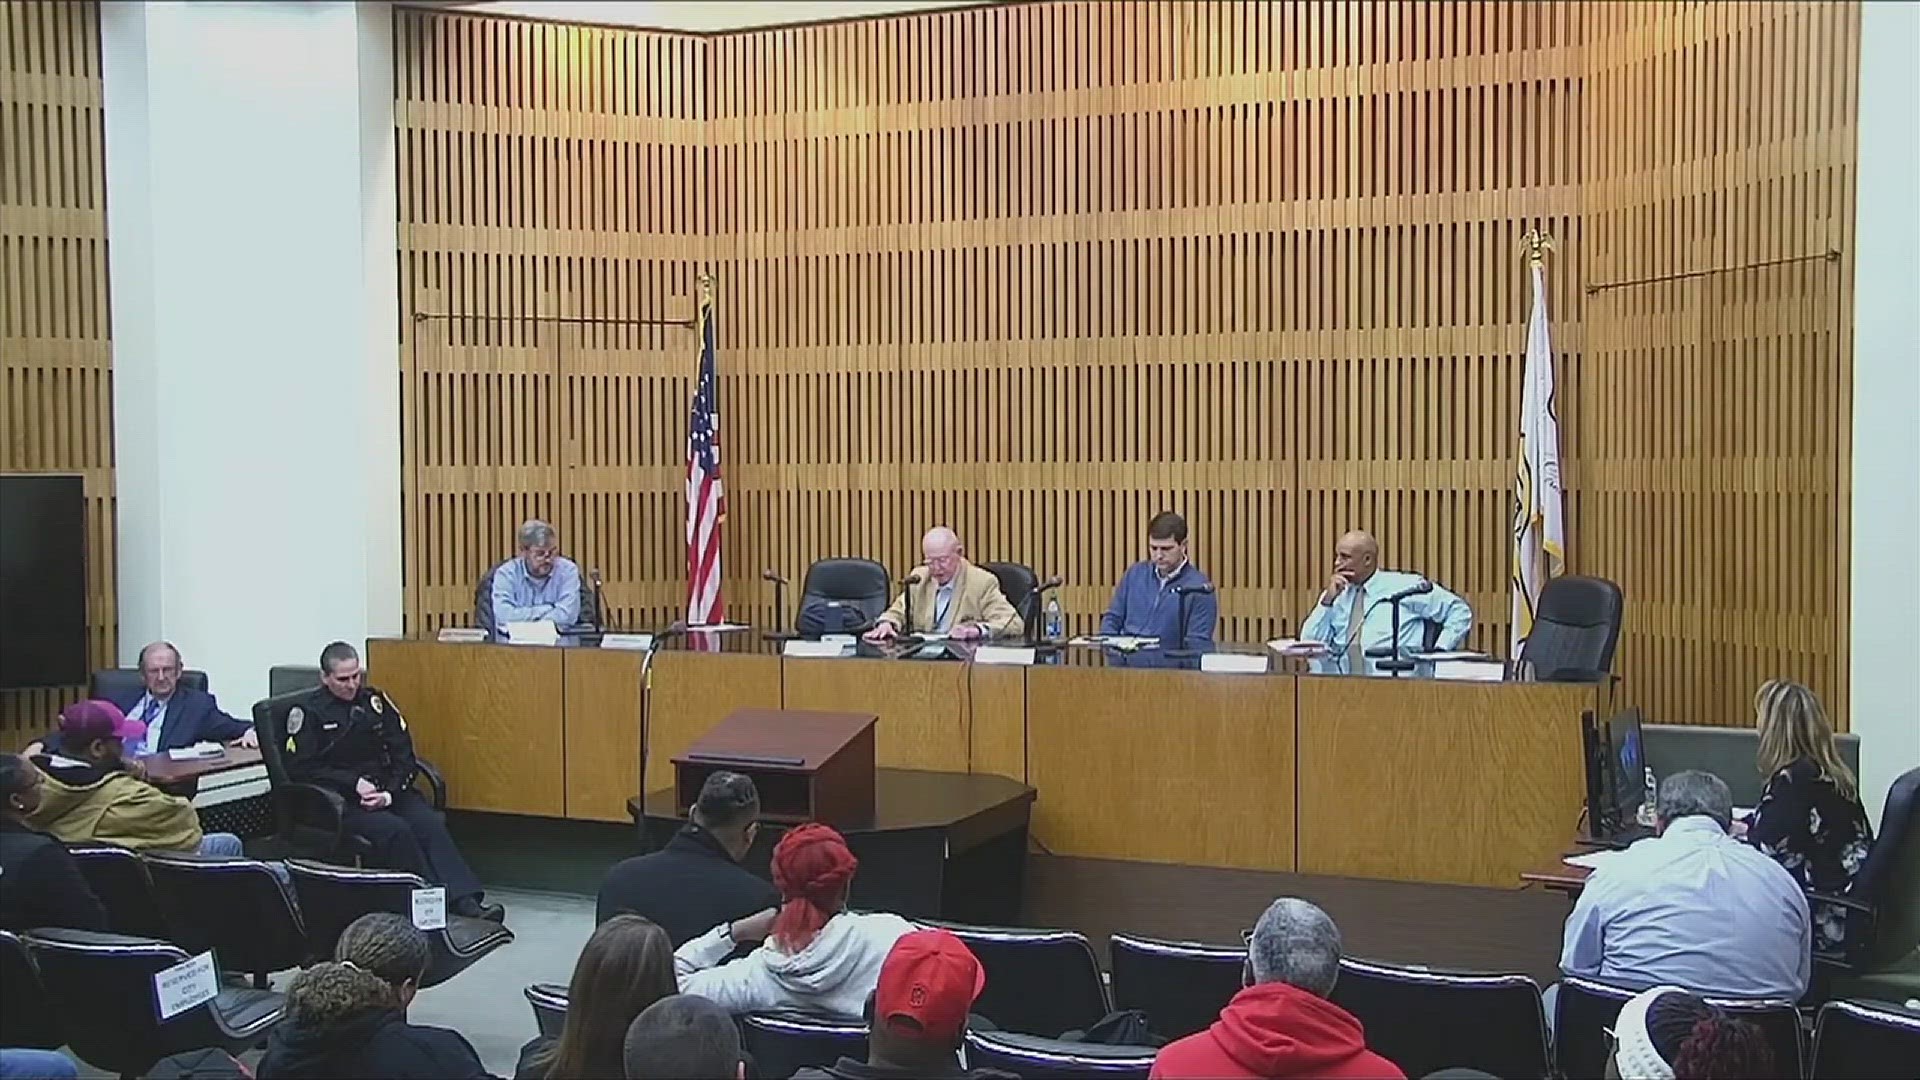 In the past four months, people at the Decatur City Council meetings have had the chance to speak up and share their feelings about Steve Perkins' passing.